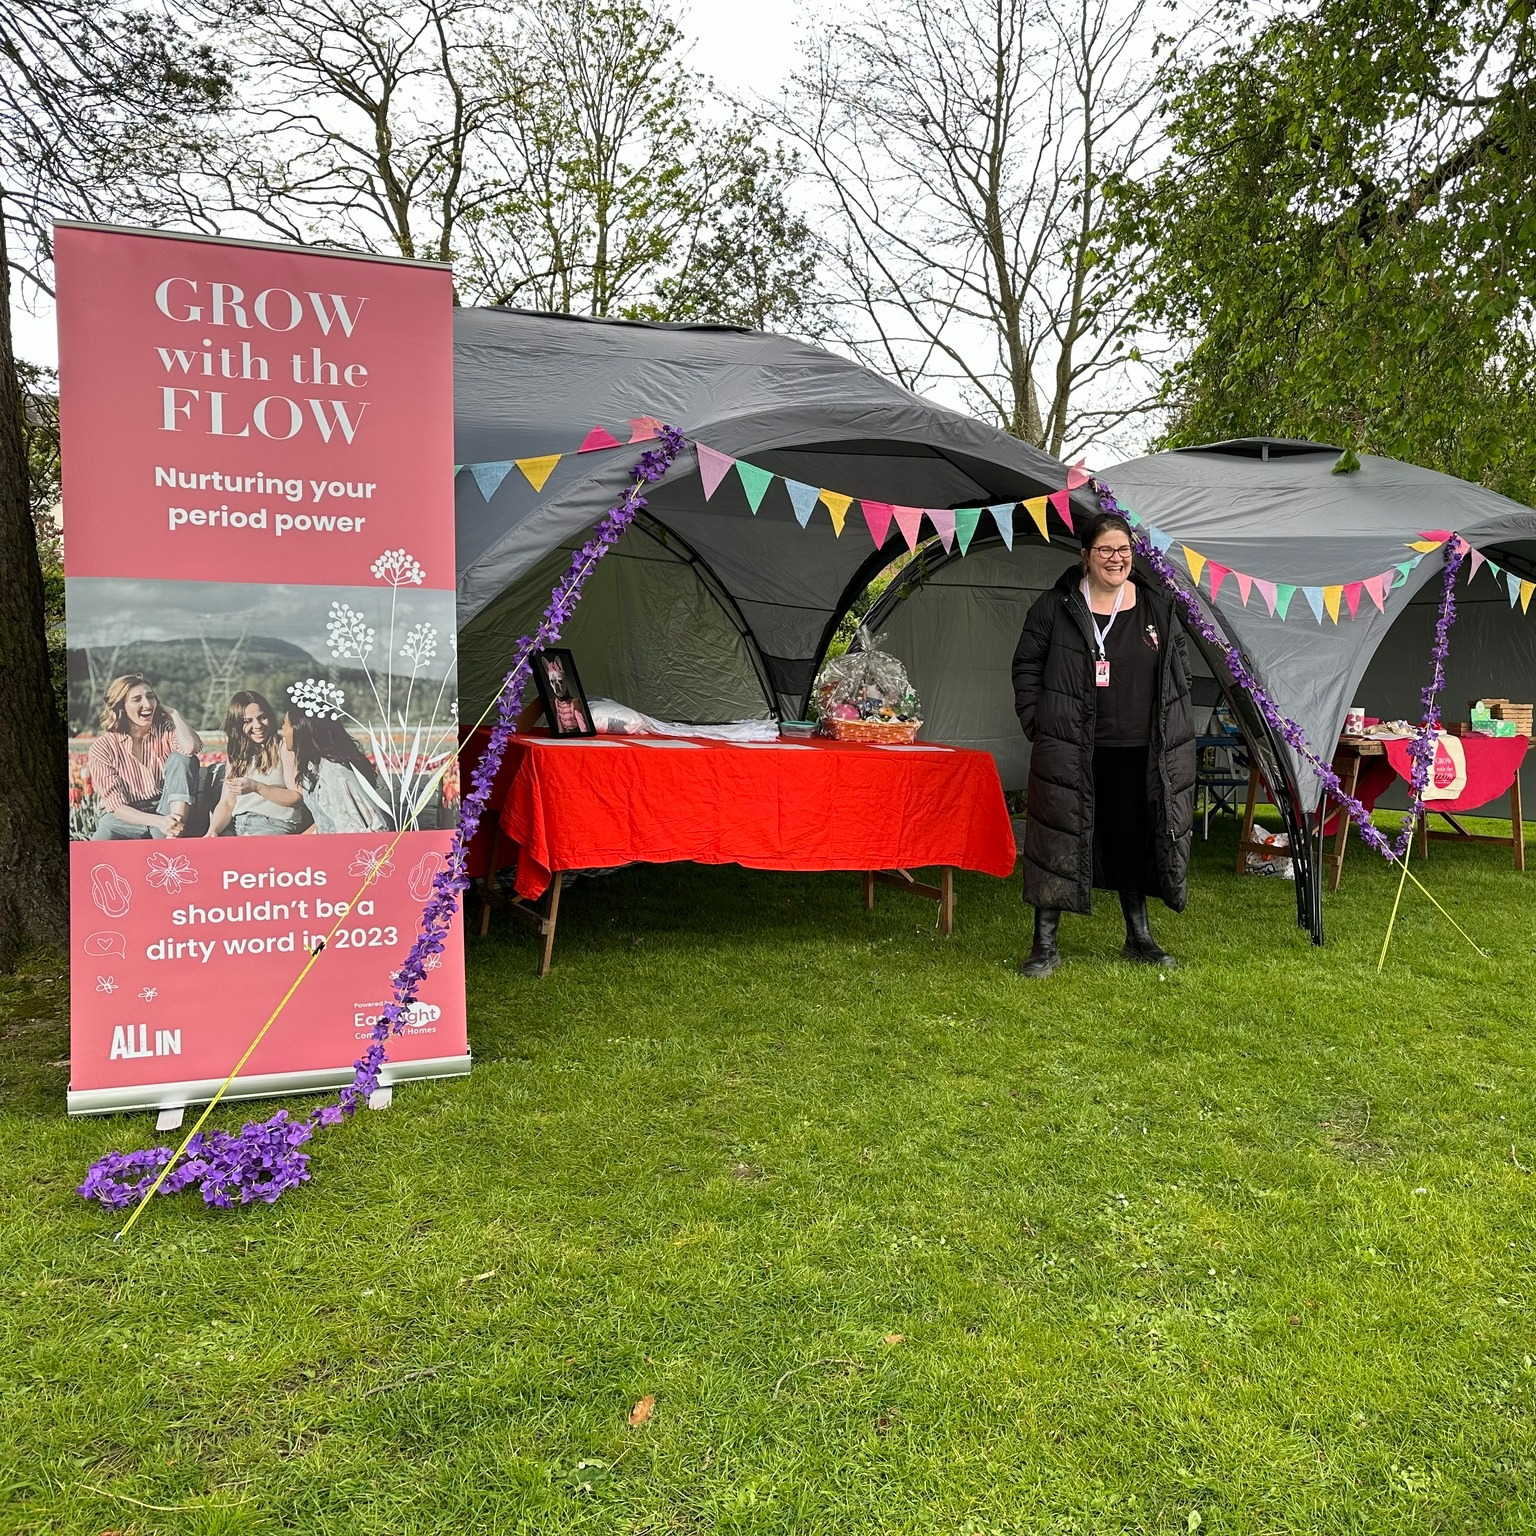 The image shows a tent with a female standing in front of it looking at the camera. There is also a banner stating 'grow with the flow'.